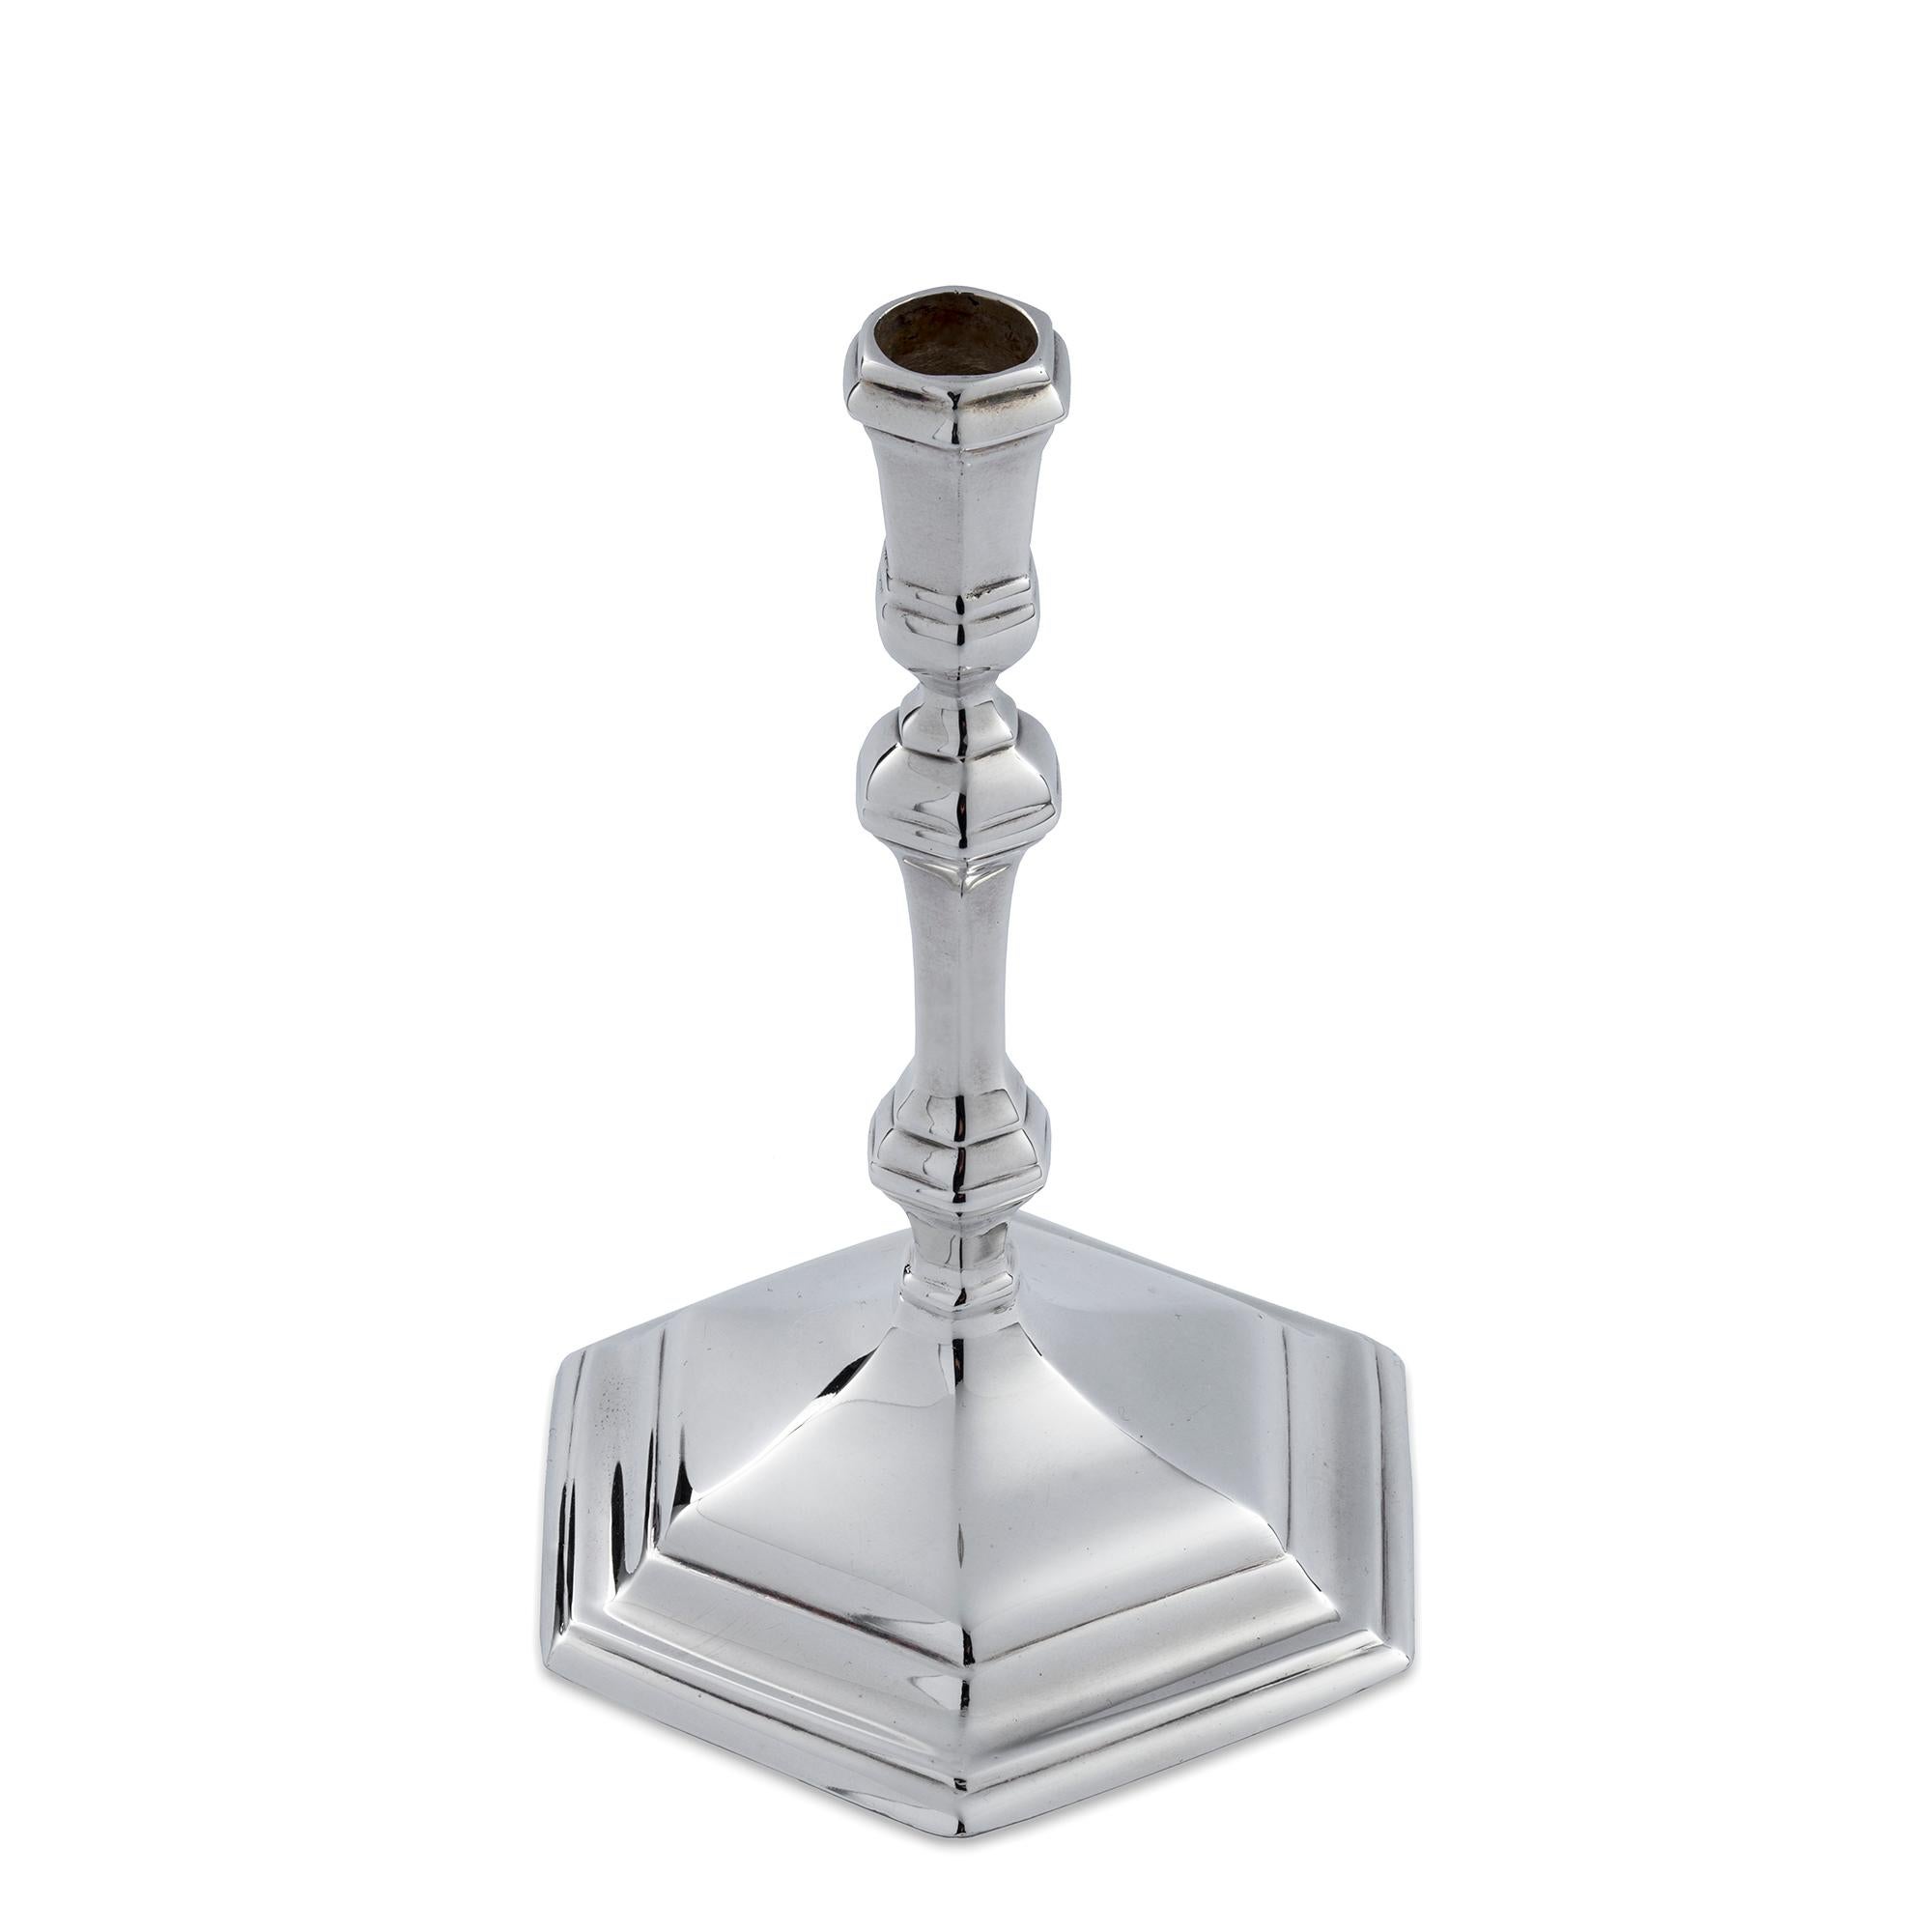 silver candlesticks for sale